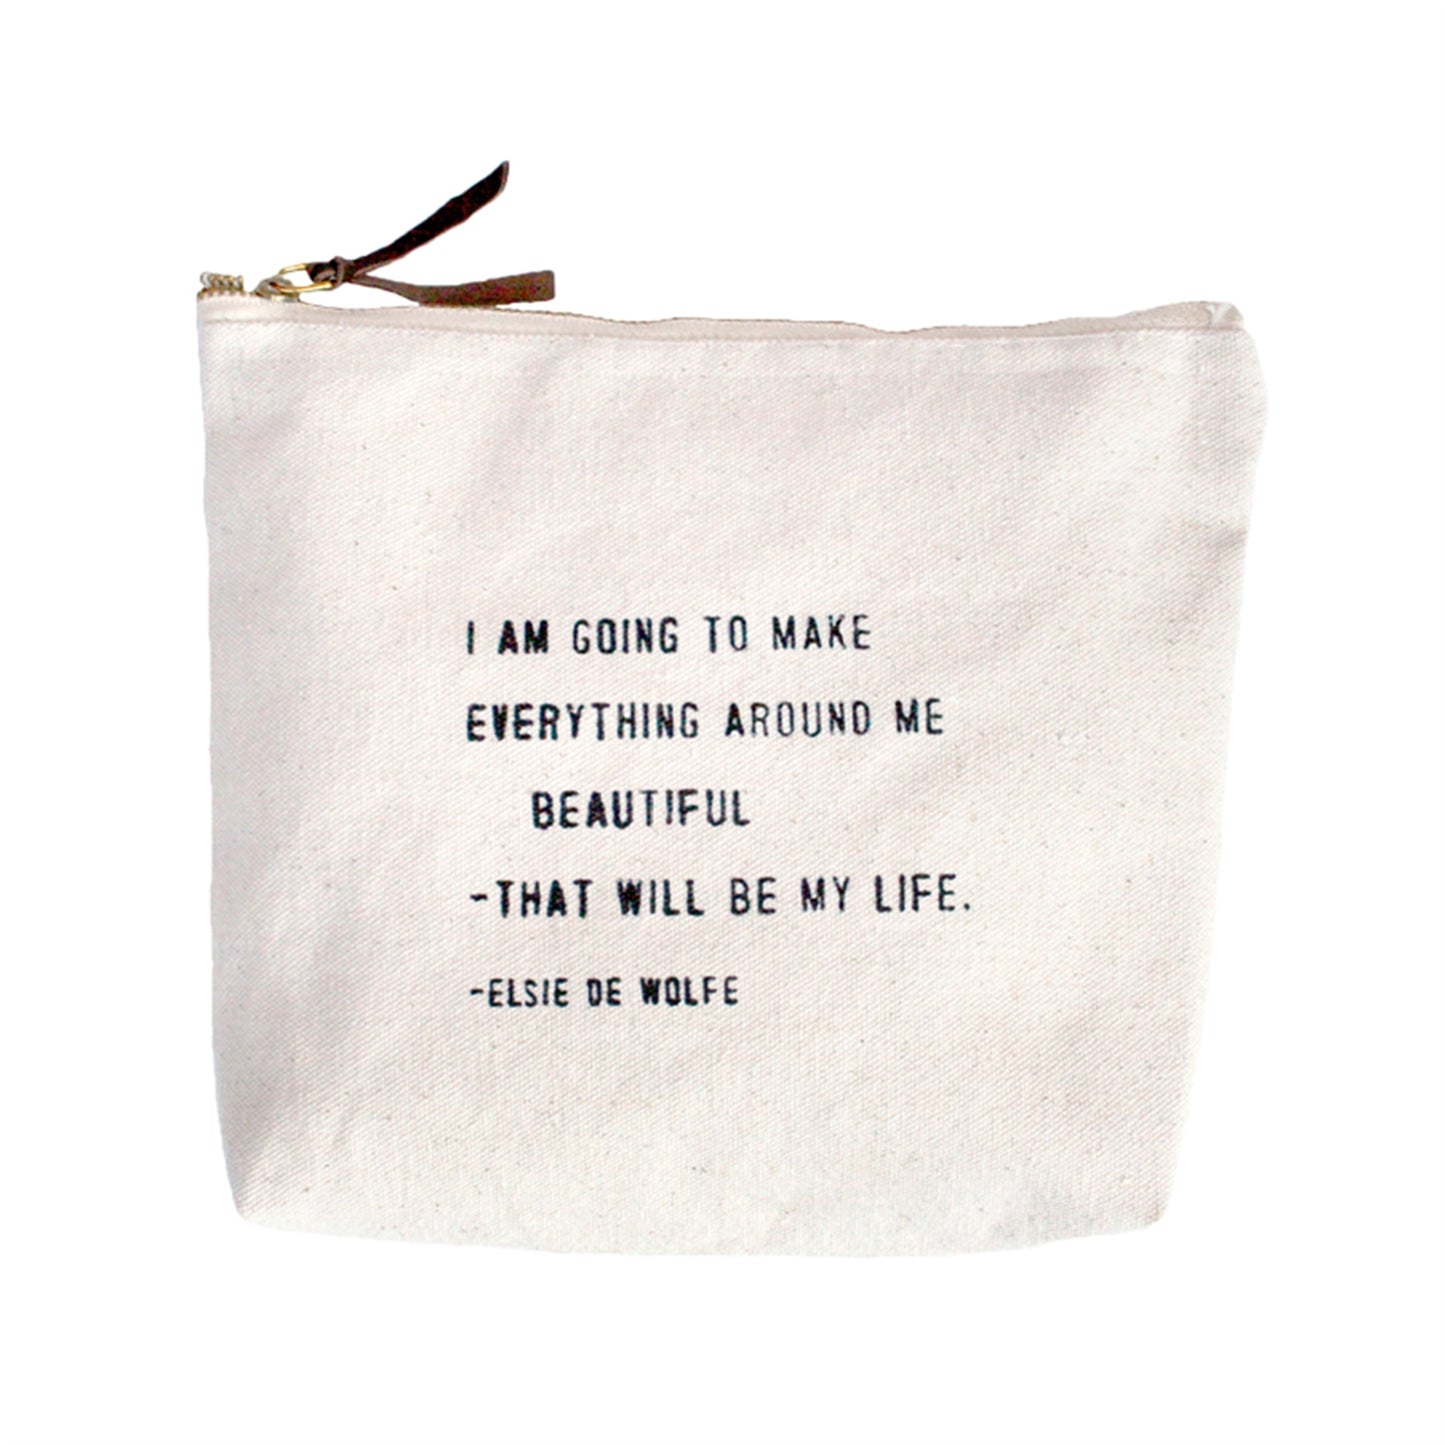 Canvas Zipper Bag - I Am Going To Make Everything Around Me Beautiful. That Will Be My Life. -Elise de Wolfe - Mellow Monkey